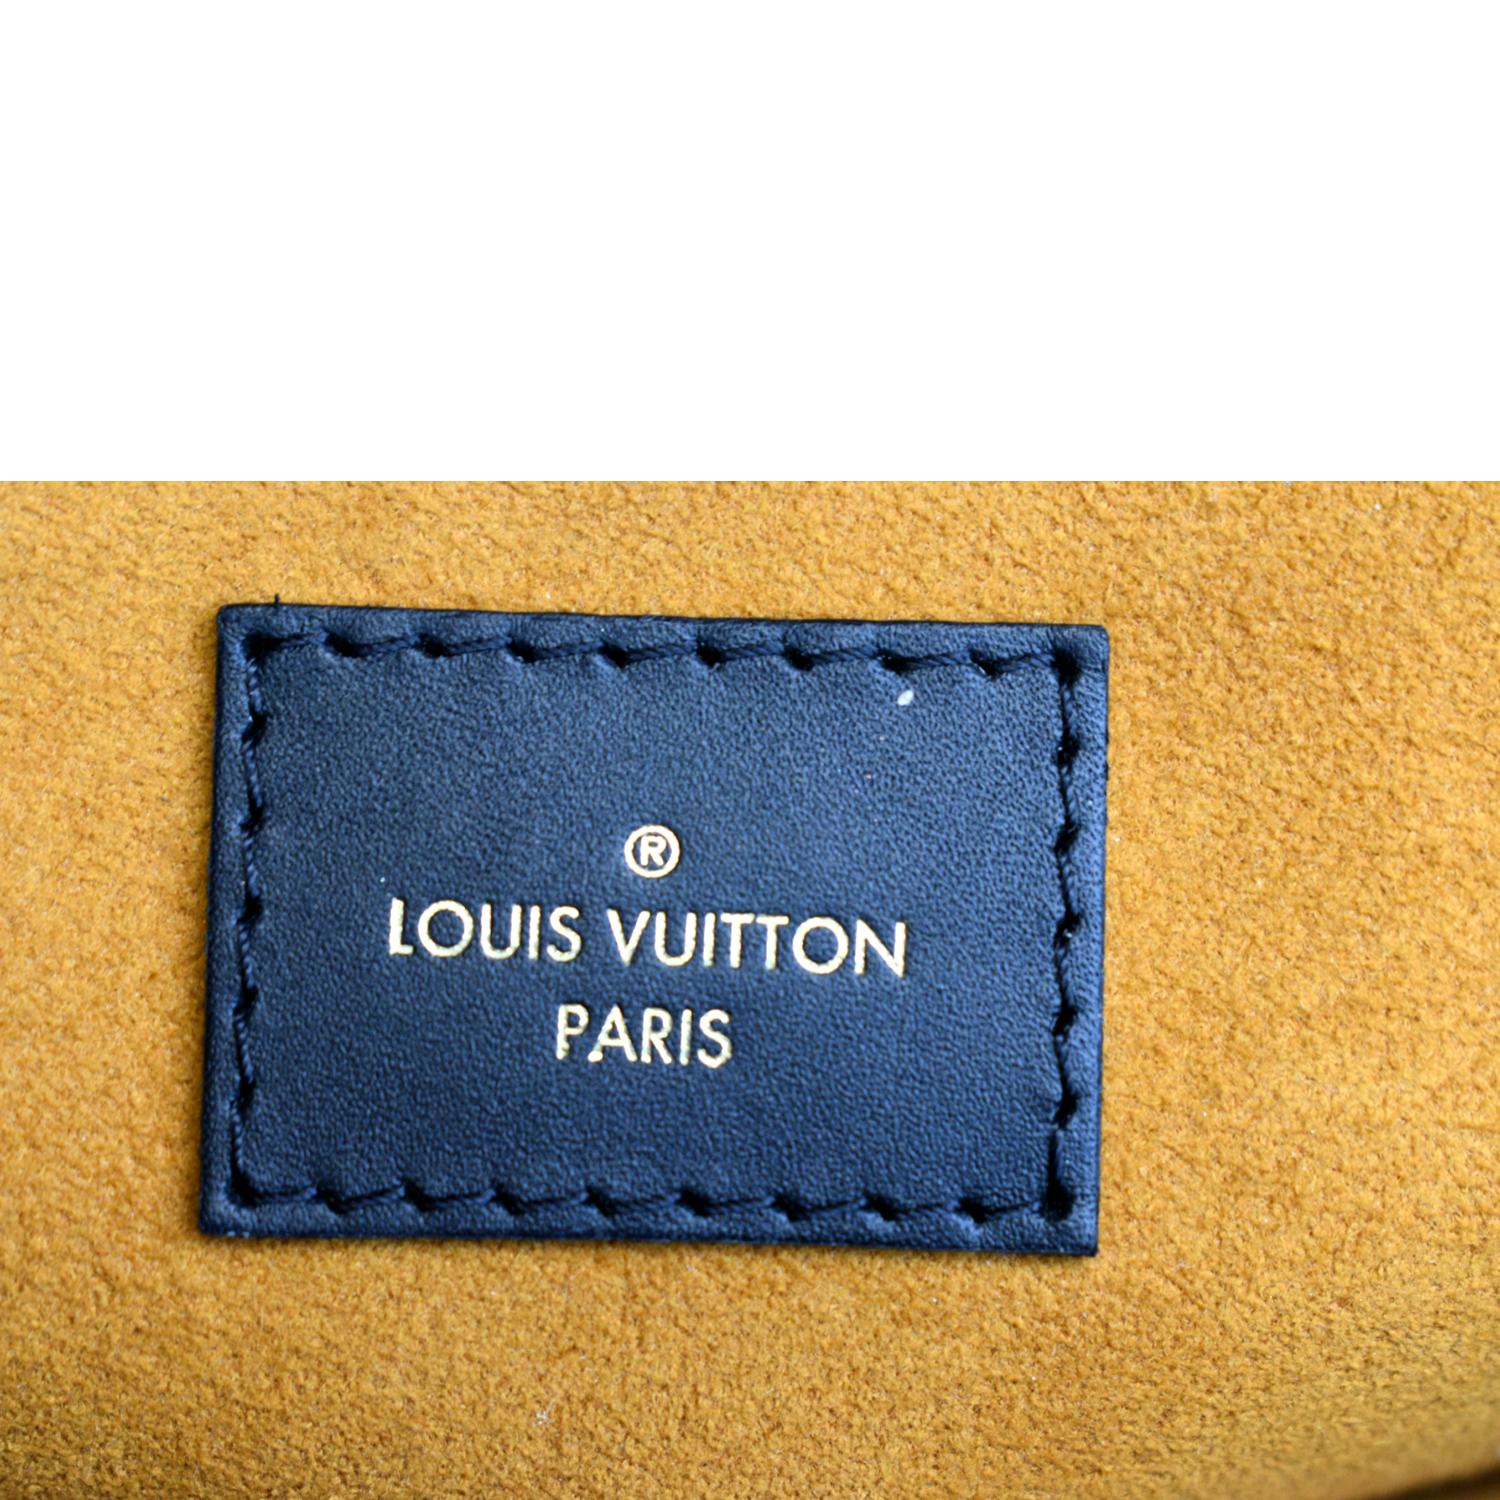 How To Spot A Fake Louis Vuitton OnTheGo bag - Brands Blogger